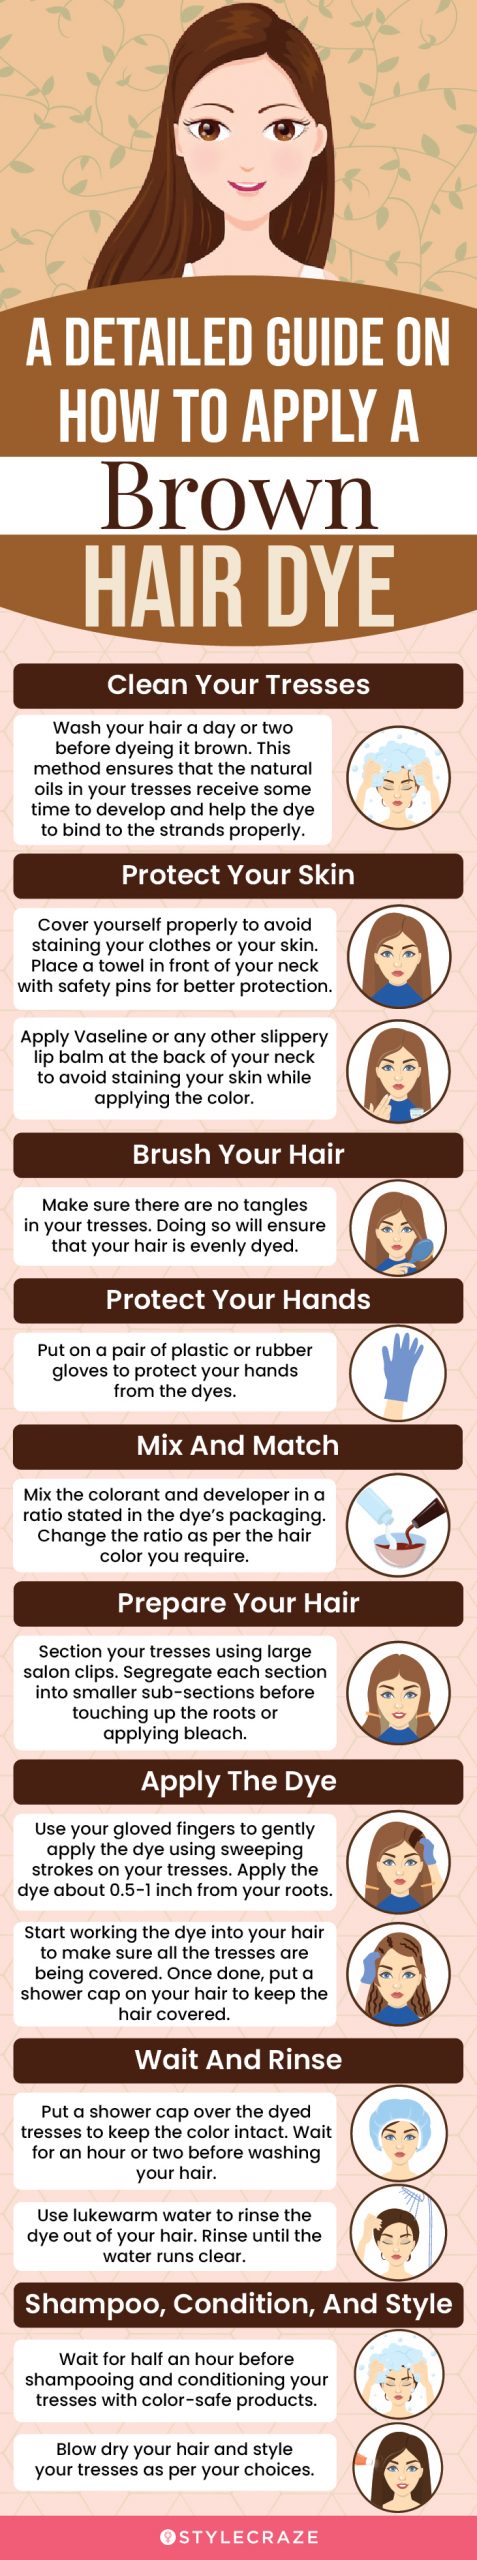 A Detailed Guide On How To Apply A Brown Hair Dye